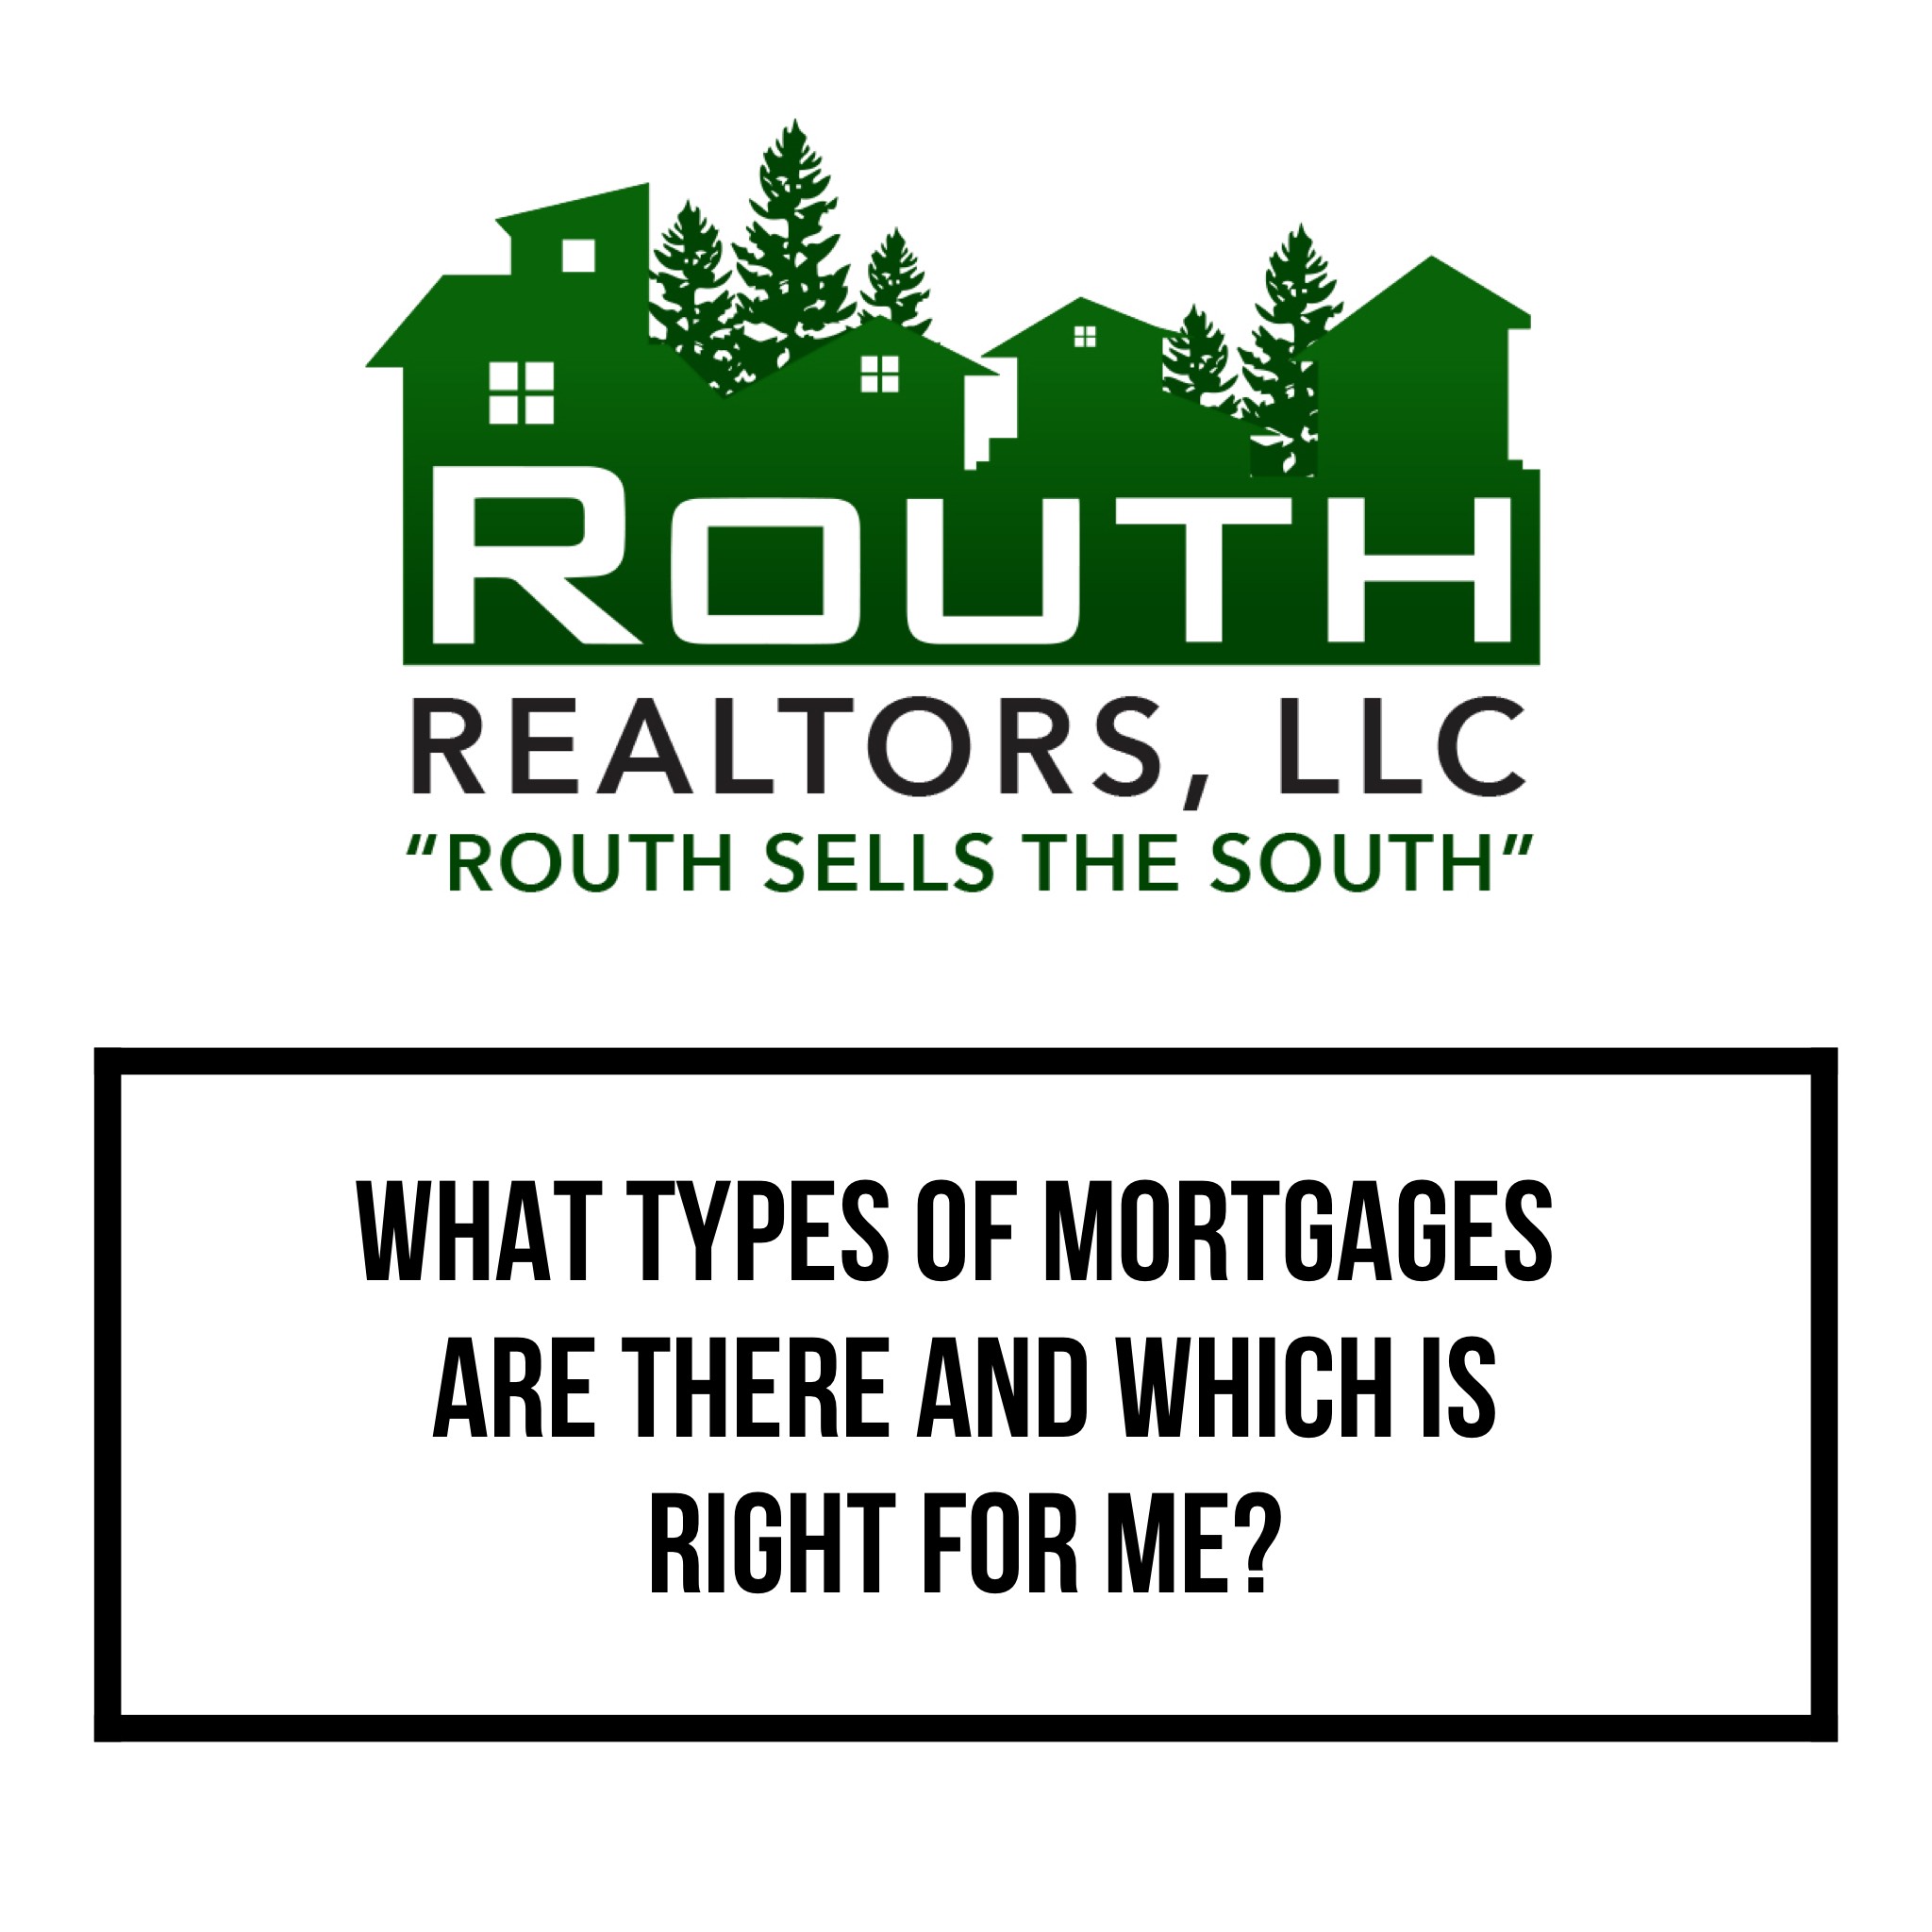 WHAT TYPES OF MORTGAGES ARE THERE AND WHICH IS RIGHT FOR ME?